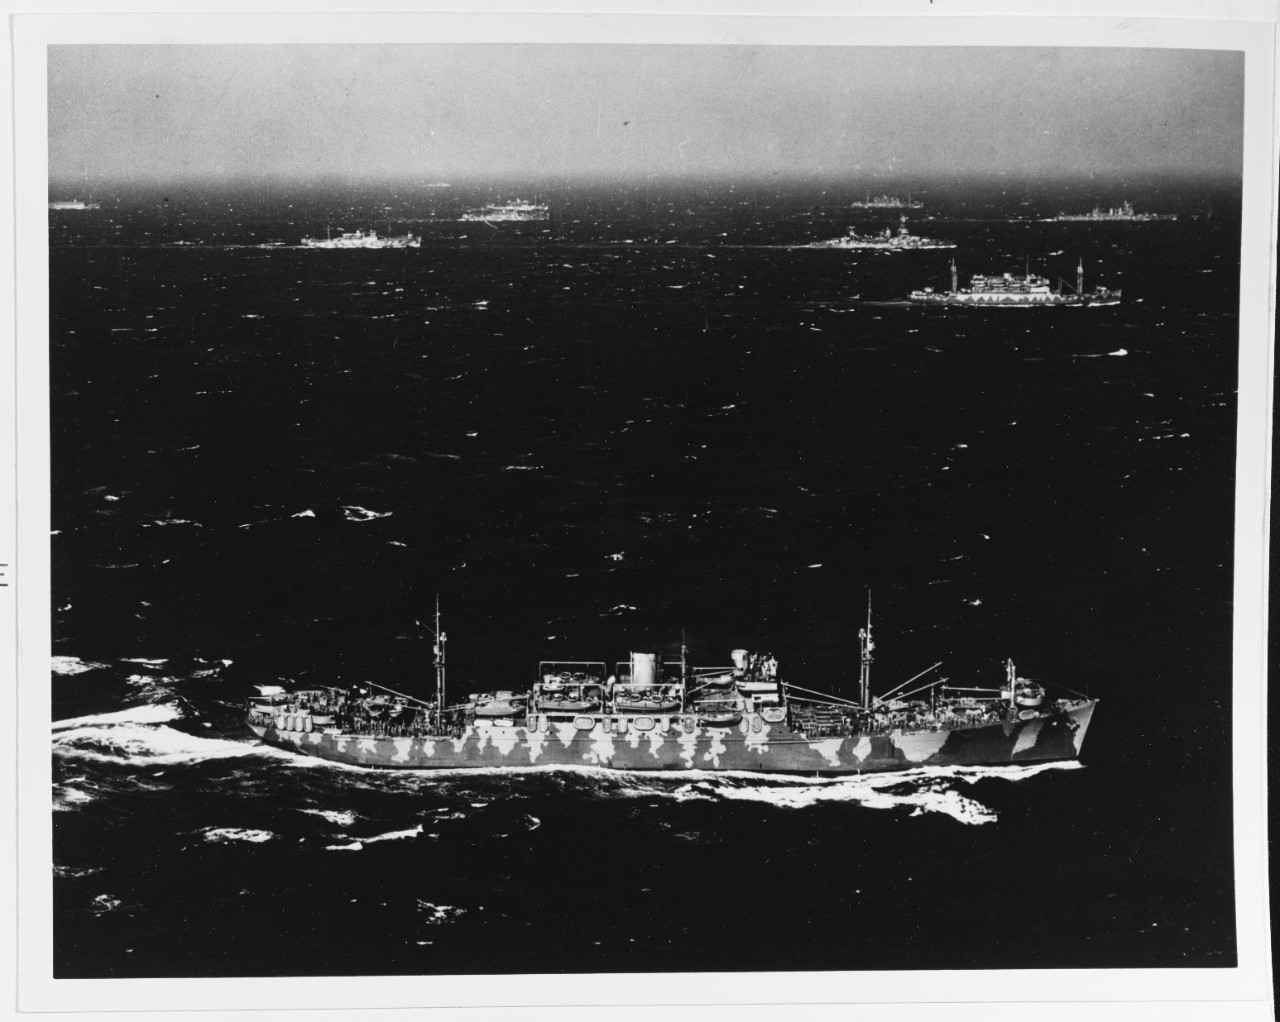 Photo #: 80-G-2408  Convoy out of Brooklyn, New York, February 1942